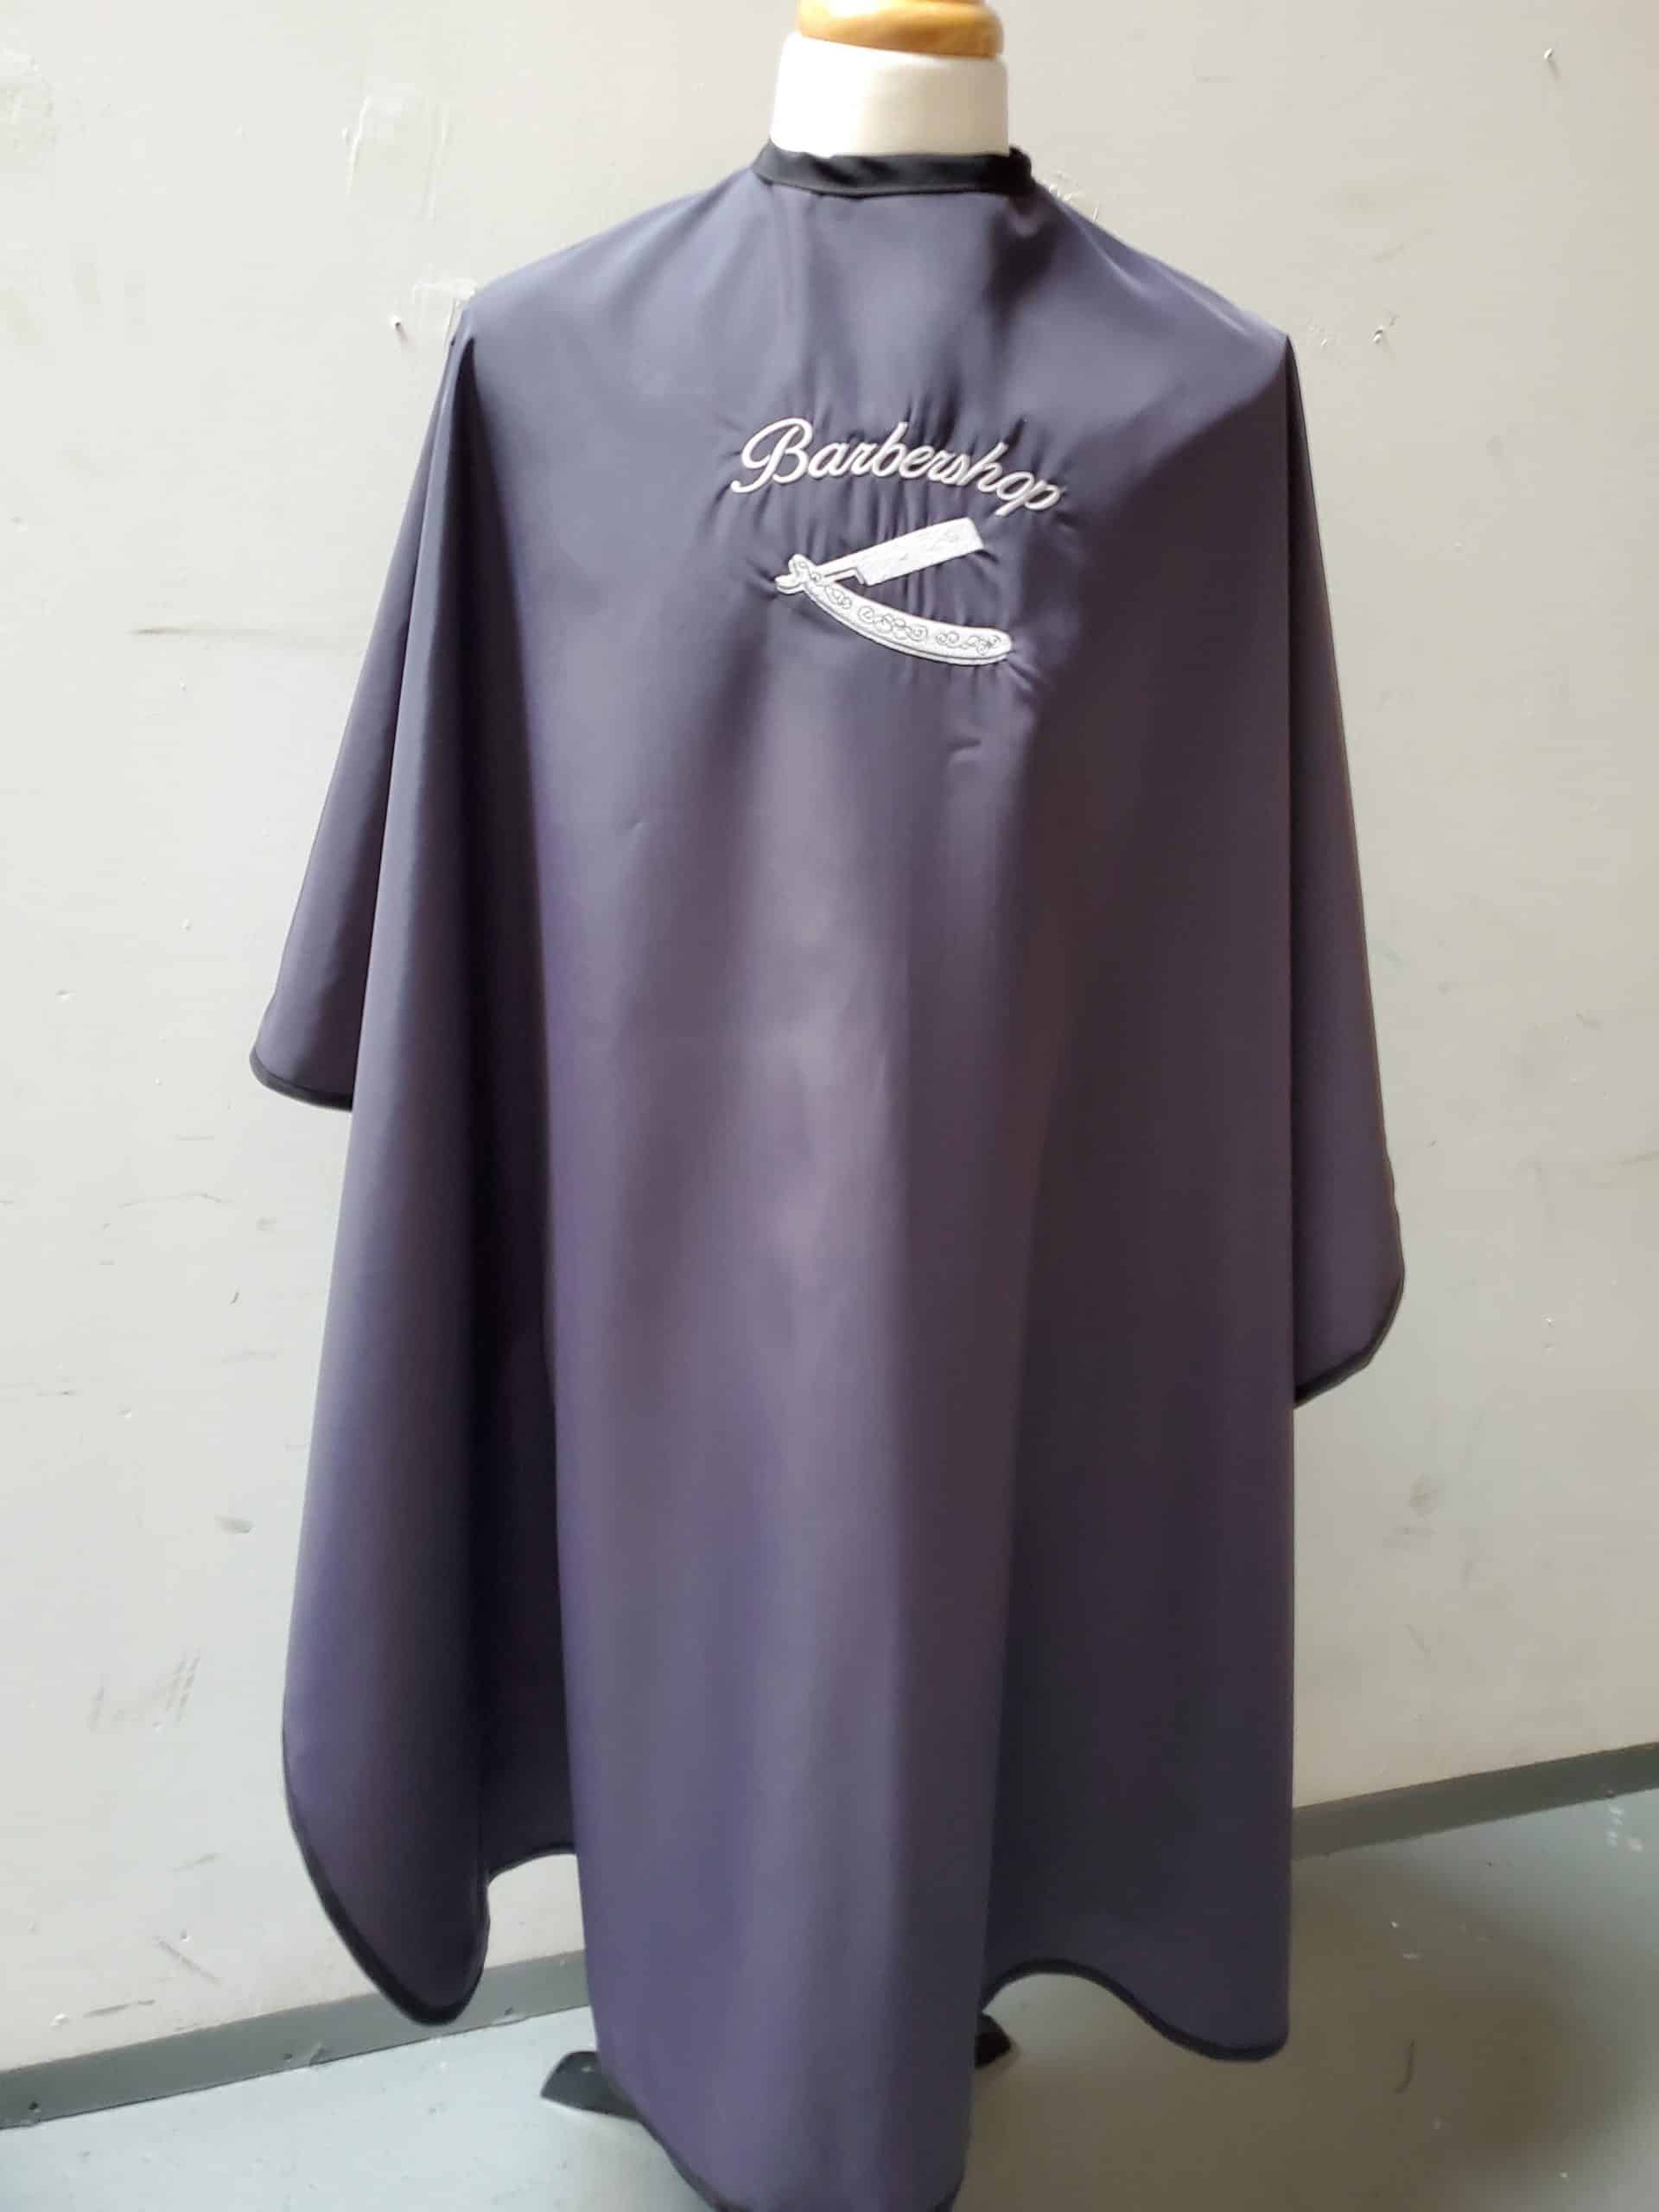 Large Barbershop cape with embroidery Style # 935